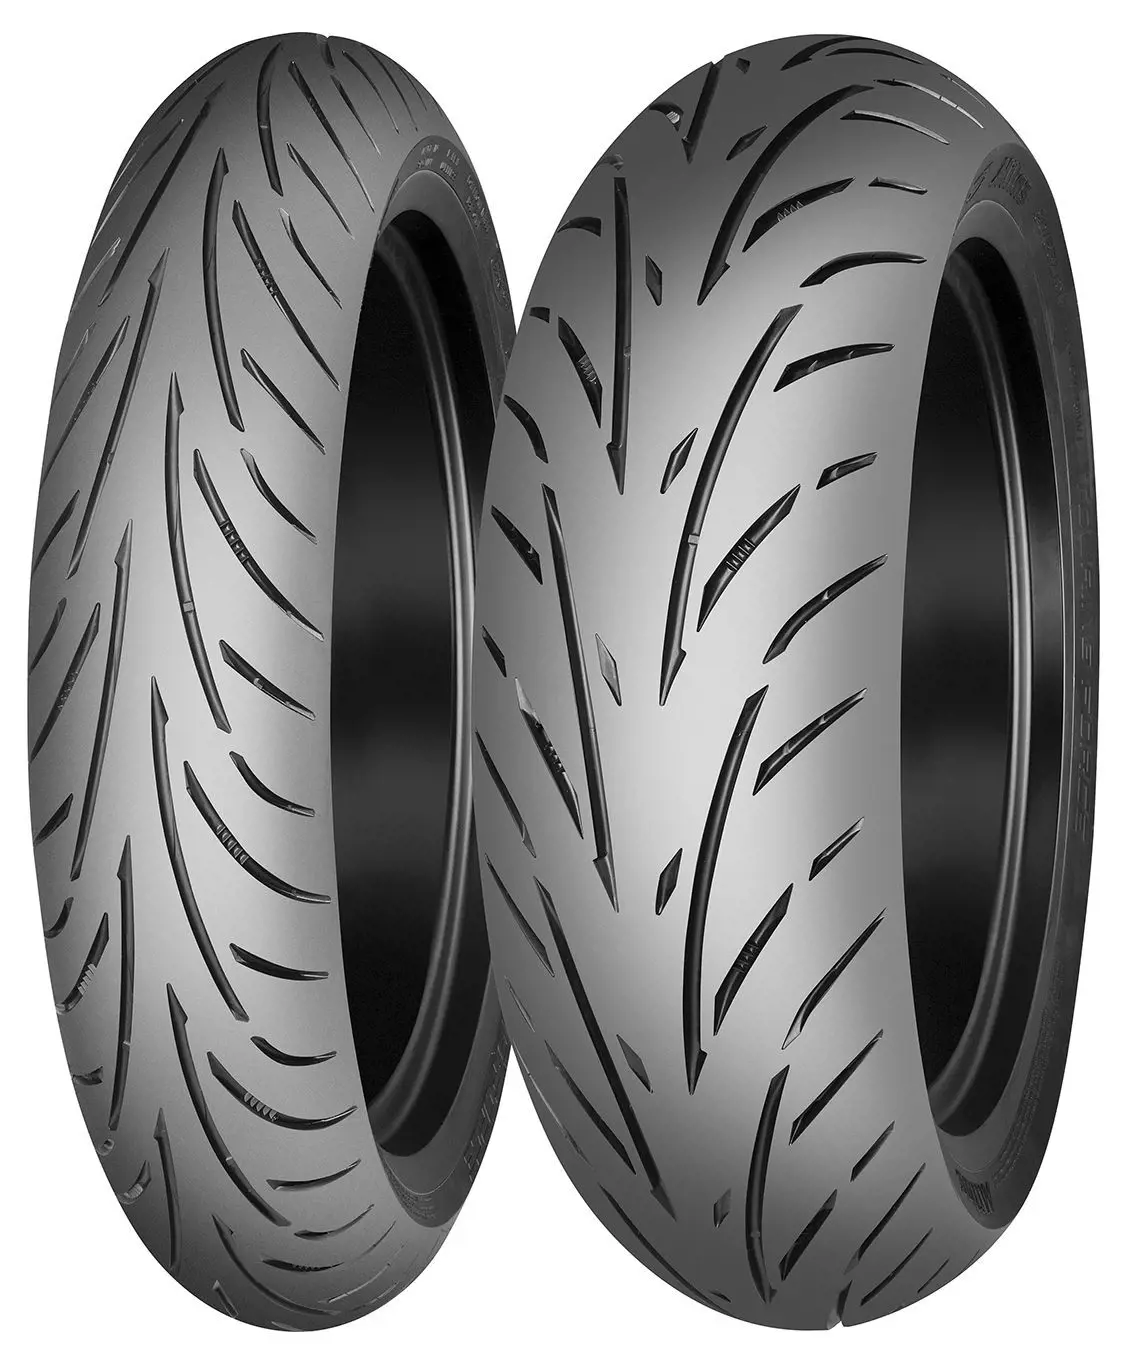 150/70 R17 69V TOURING FORCE Rear M/C